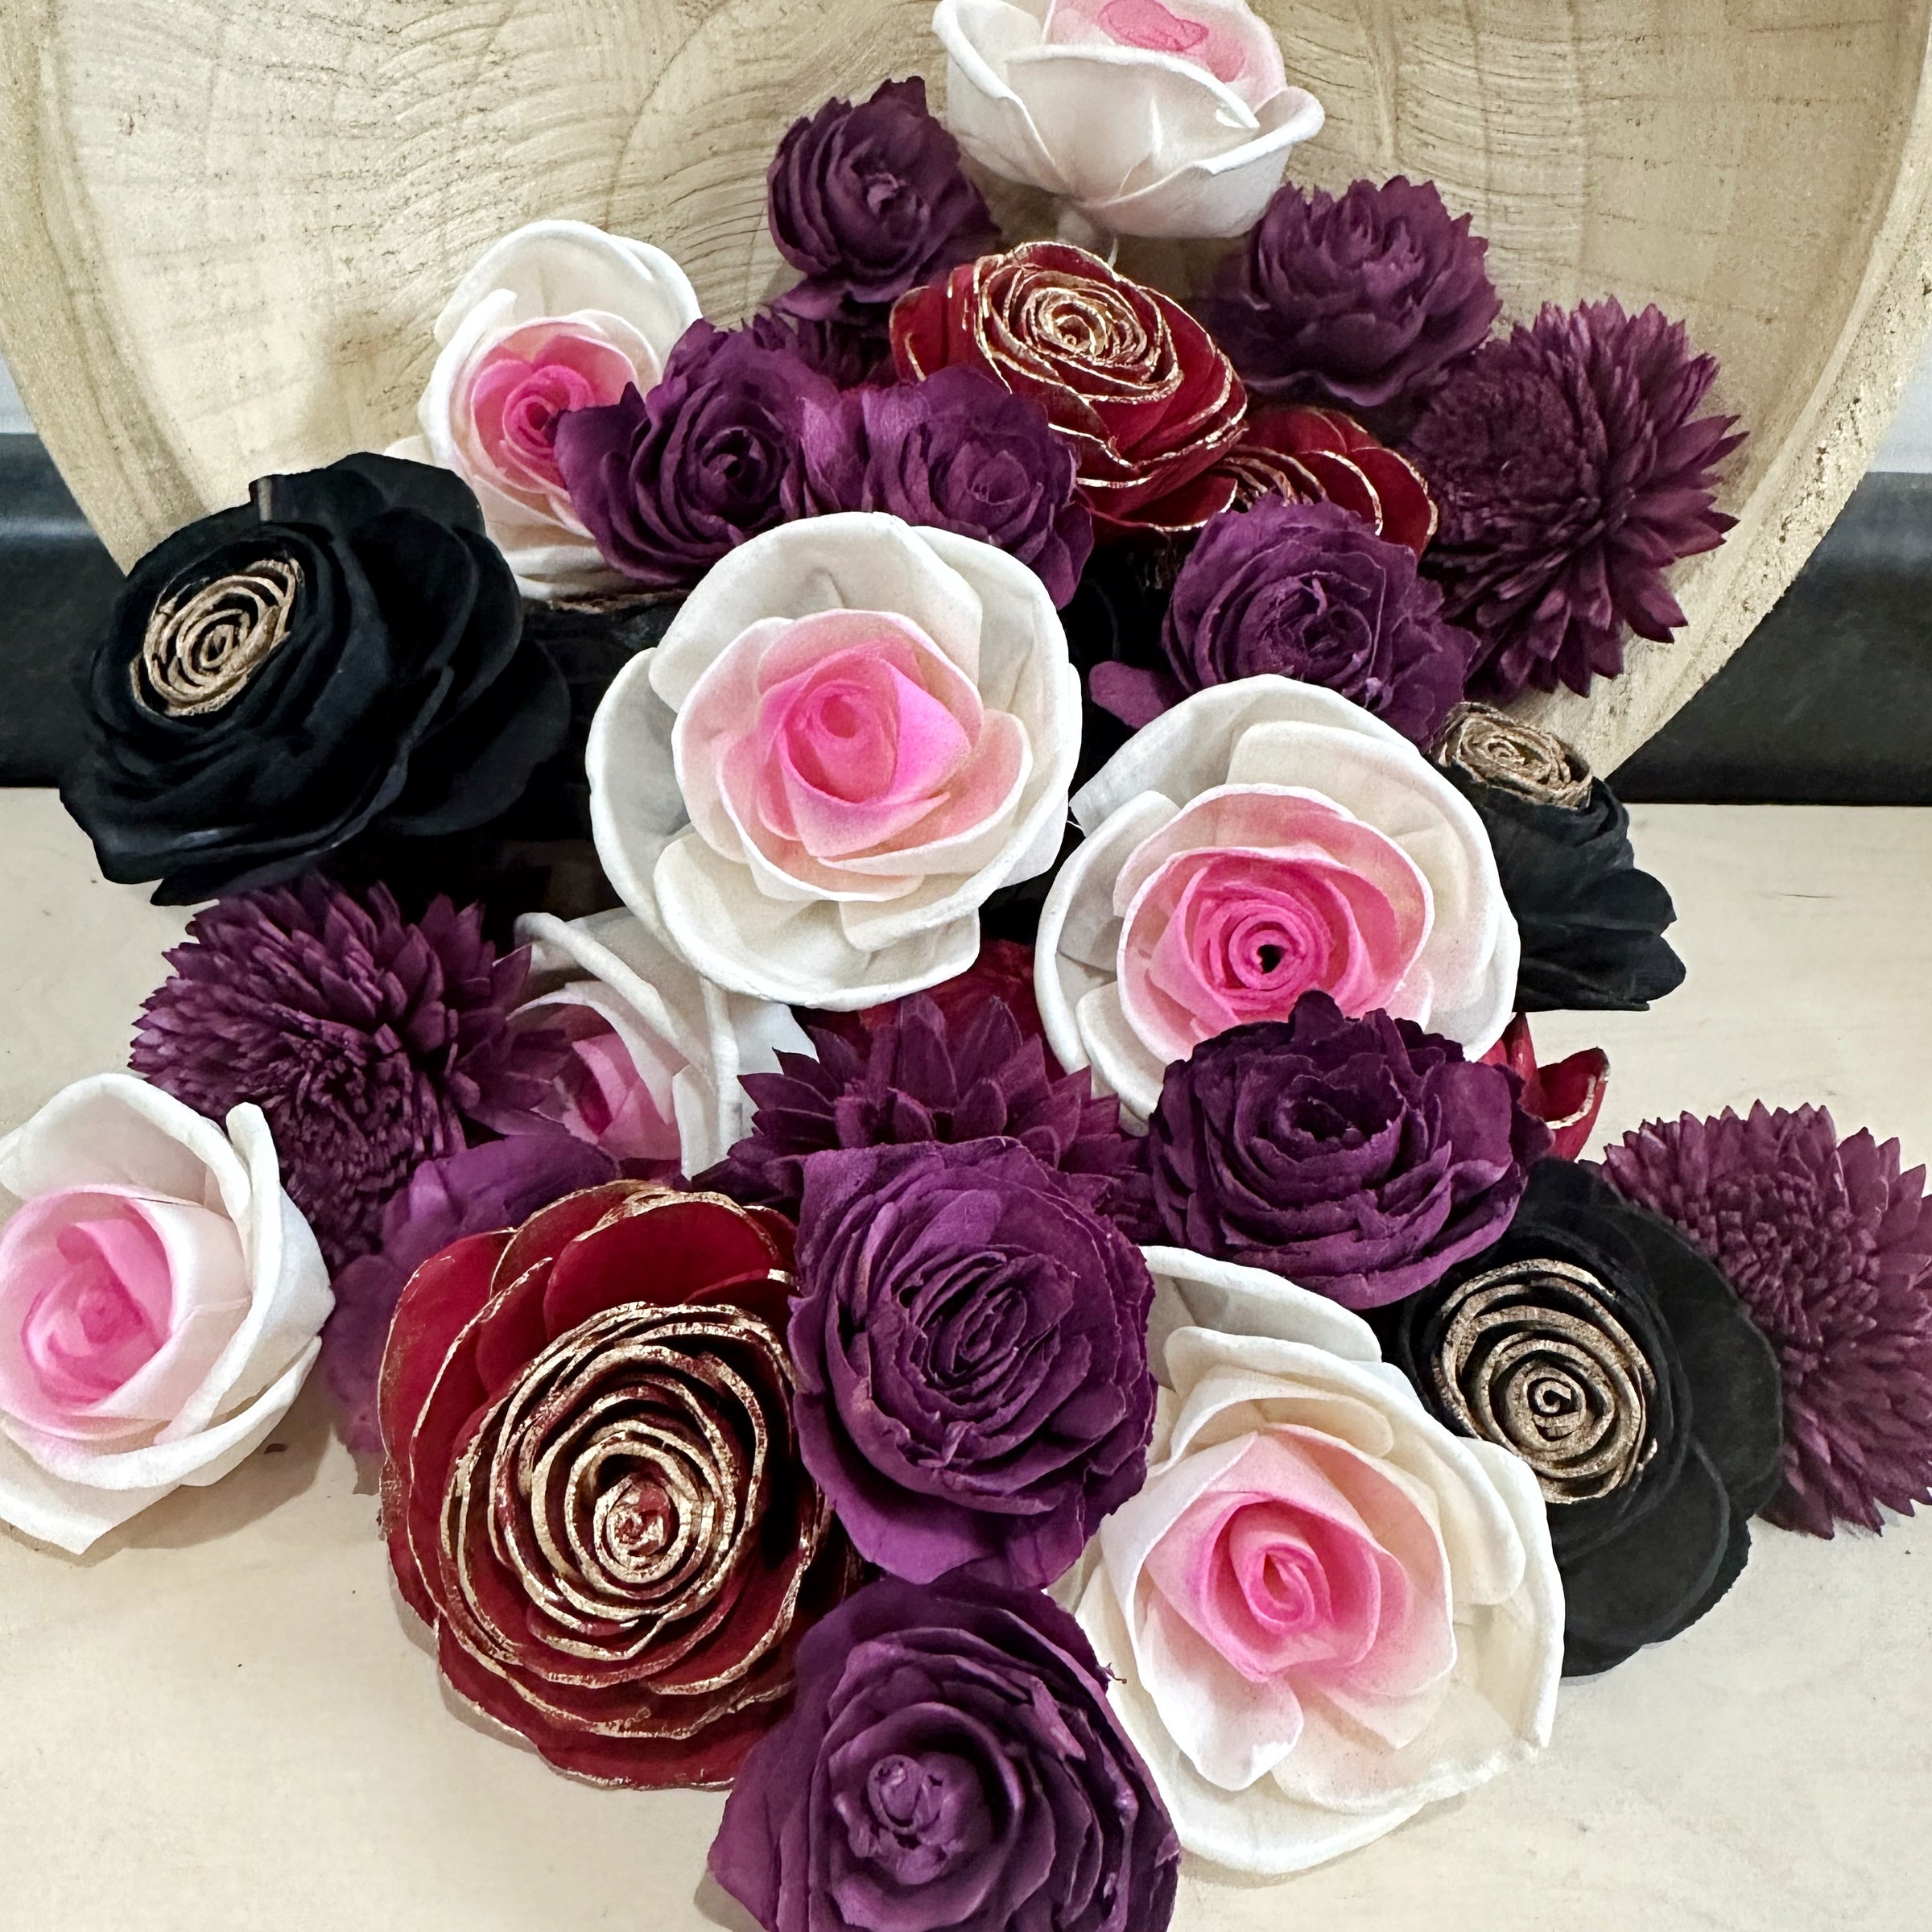 Dyed Sola Wood Flowers - Oh! You're Lovely - Sola Wood Flowers